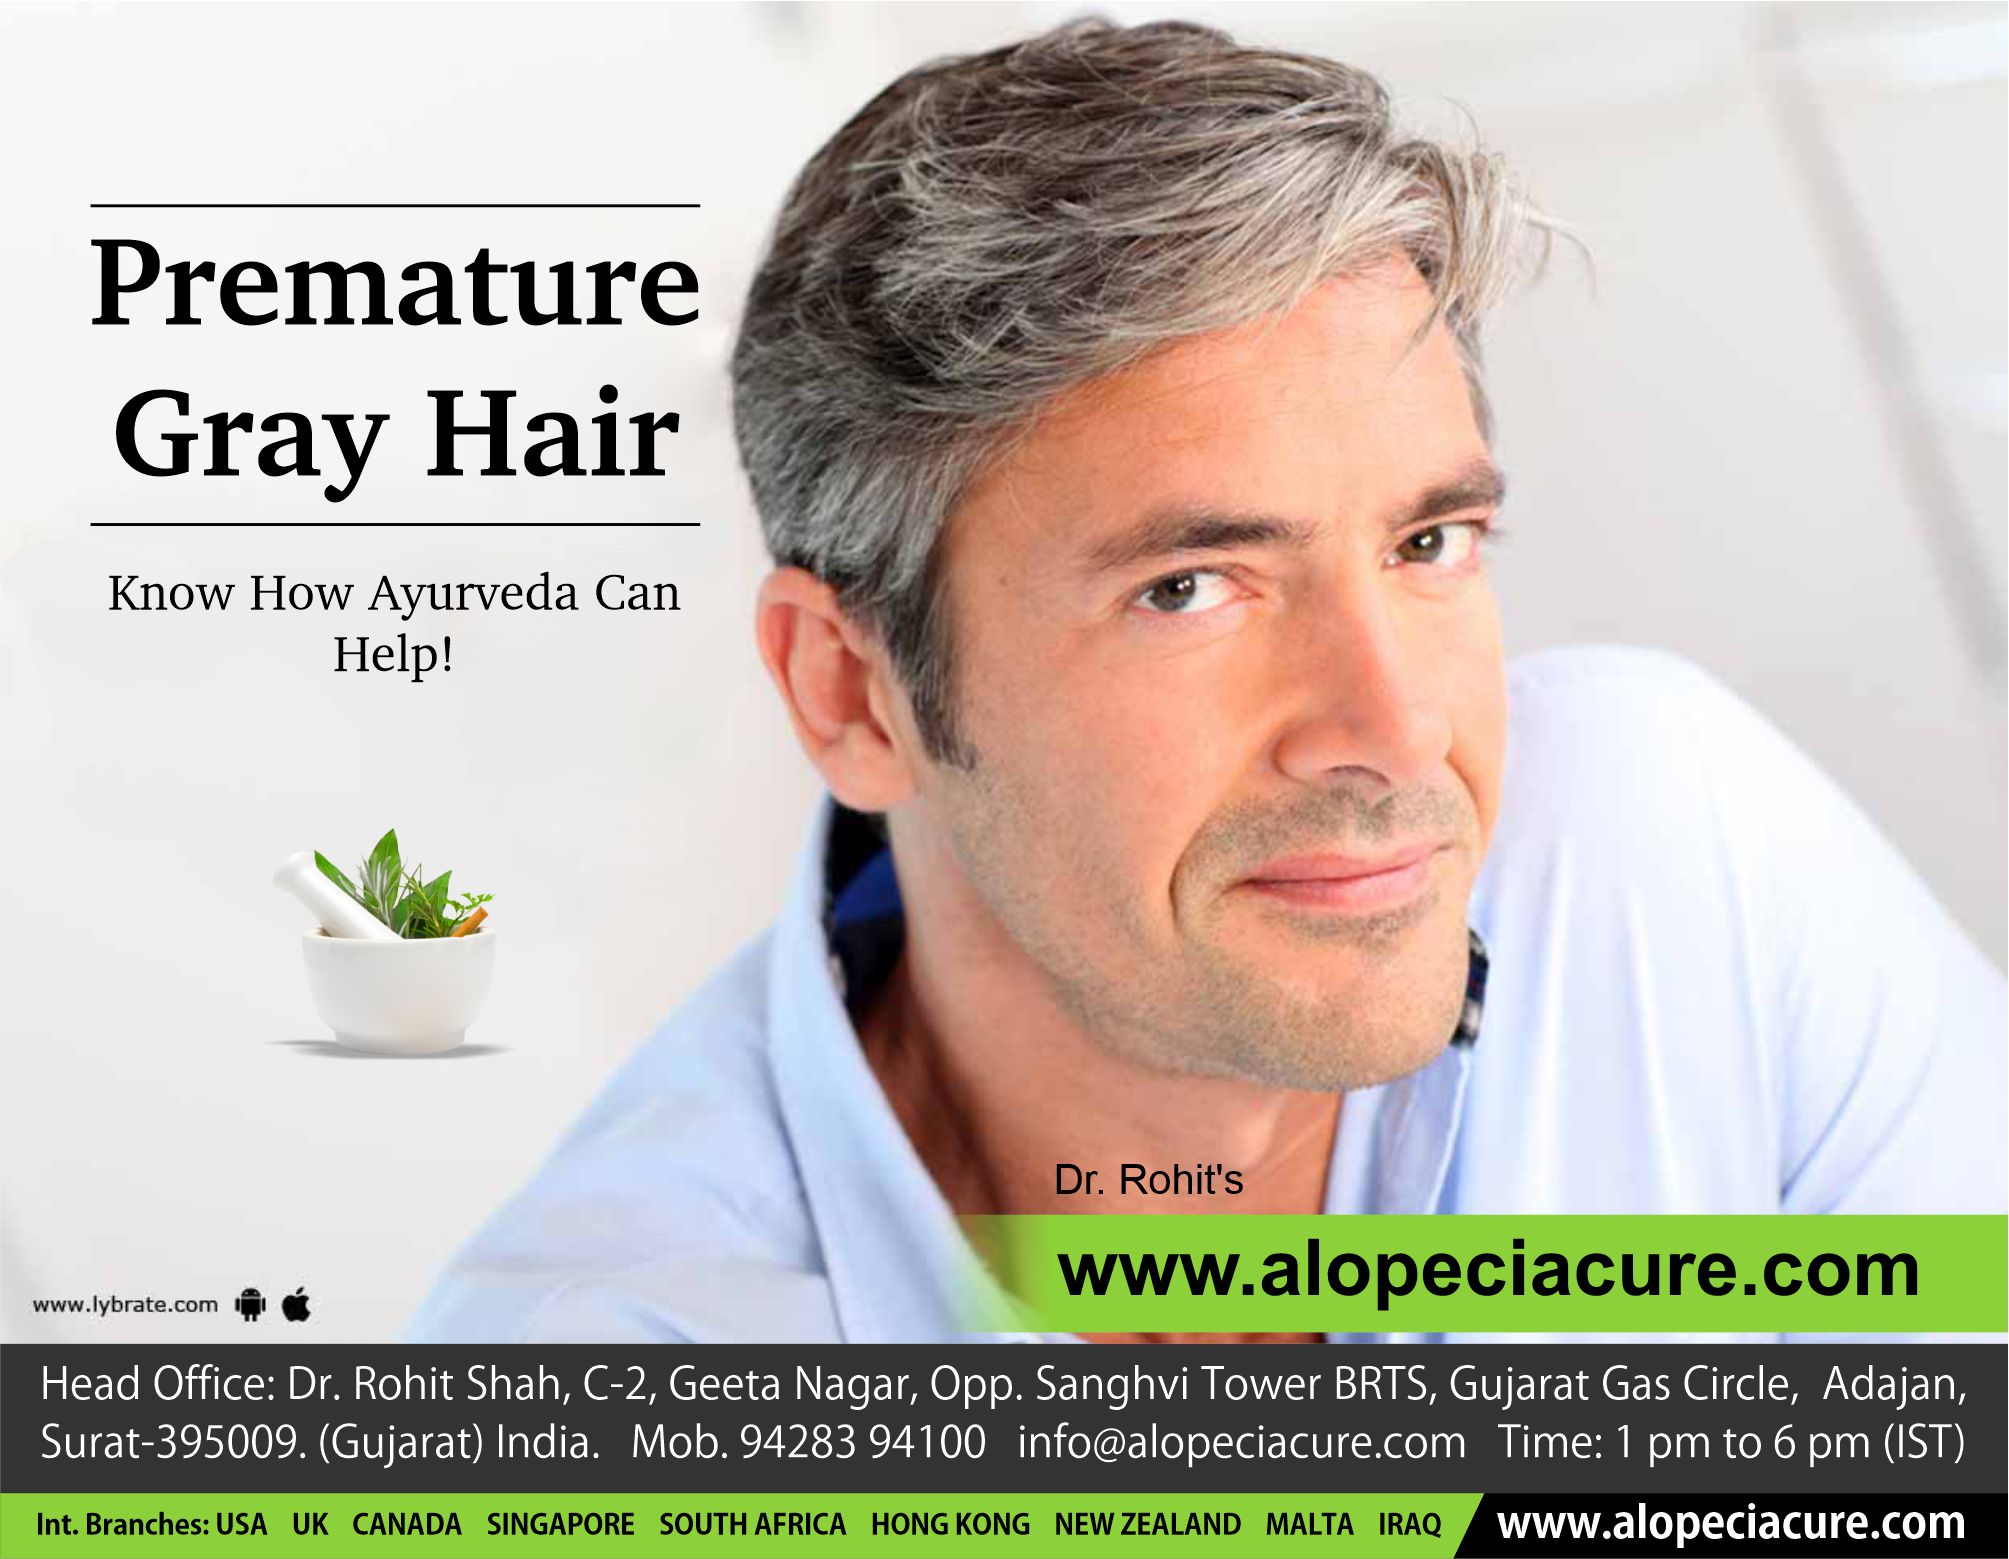 Premature Gray Hair - Know How Ayurveda Can Help!